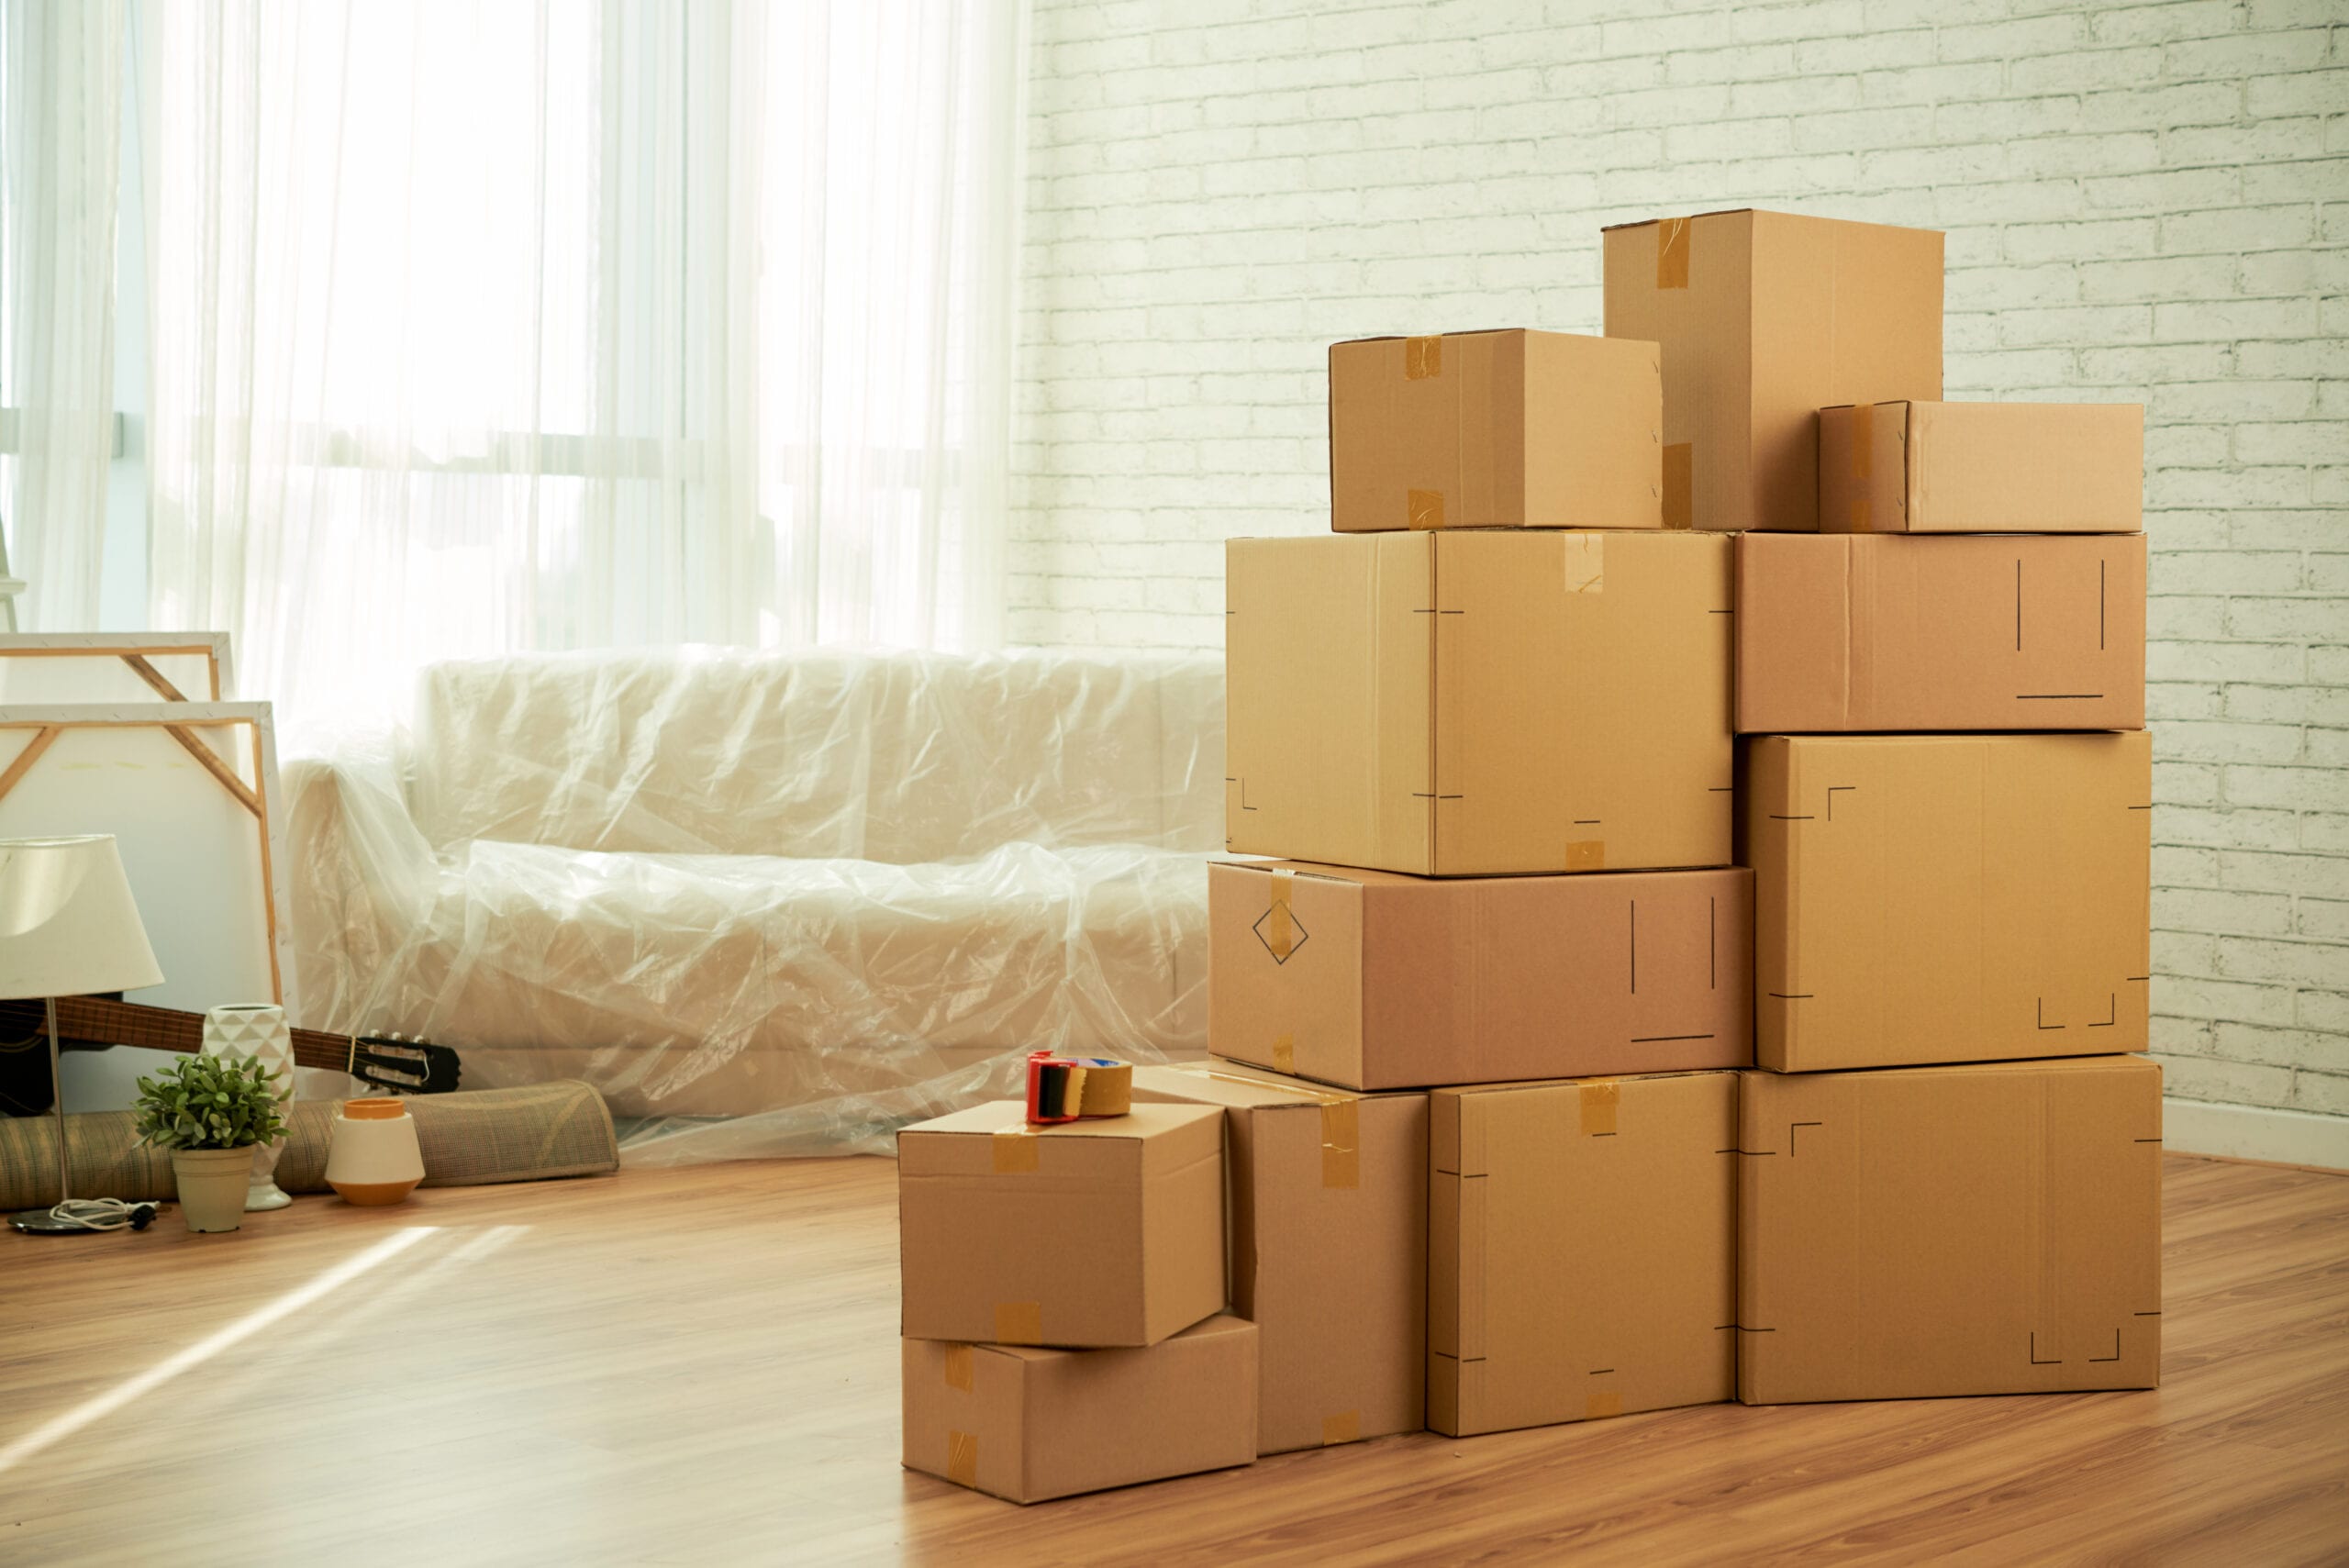 4 Best Tips to Stay Organized While Moving